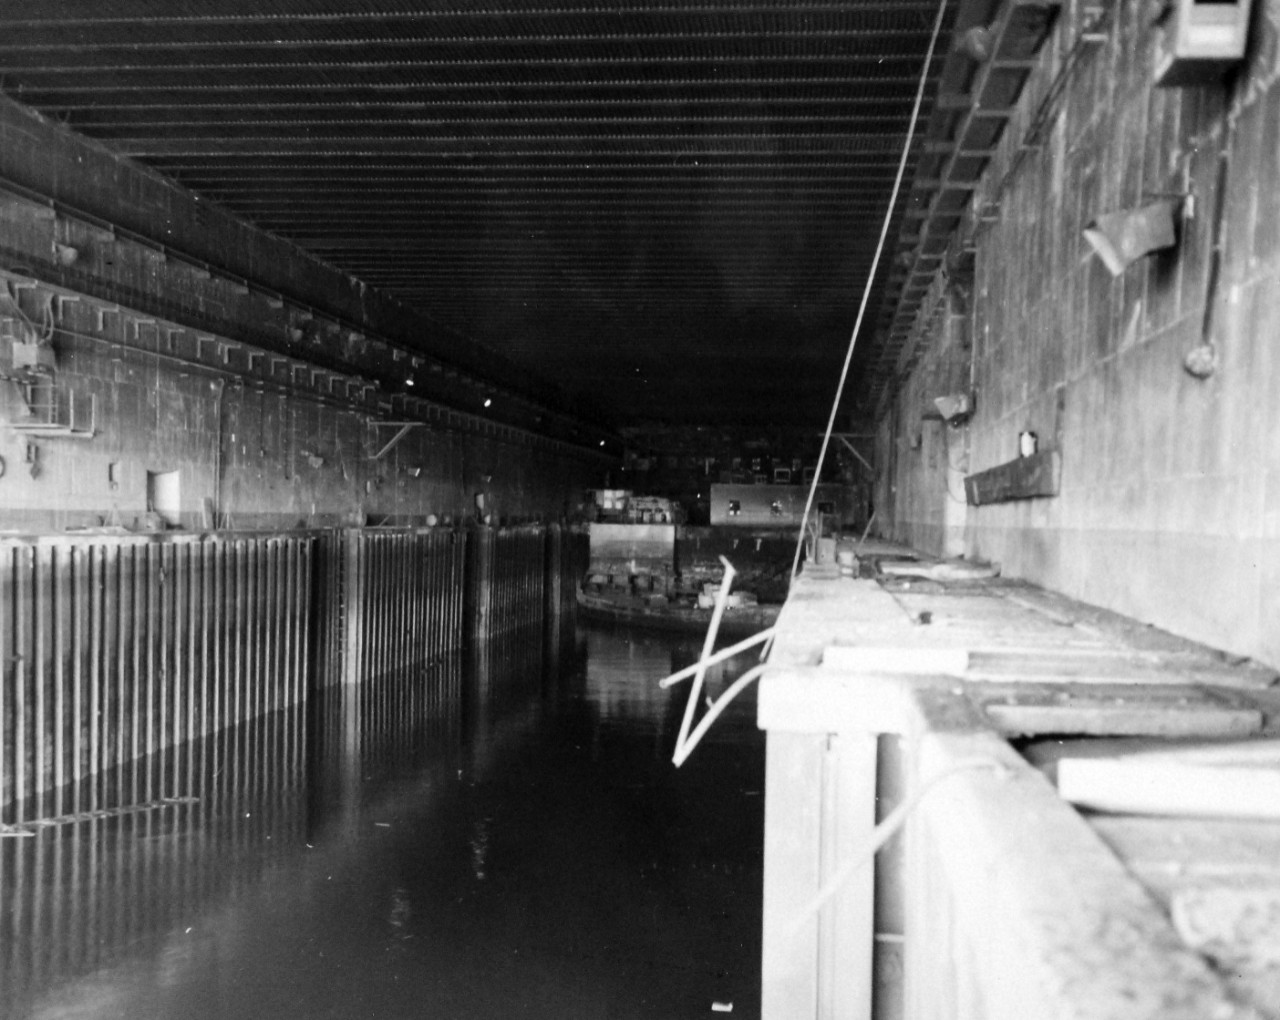 80-G-257415:   Invasion of Southern France, Brest, August-September 1944.   Under massive, thick roofs of concrete and steel, German U-Boats once were sheltered from Allied air raids in these pens at Brest, France, October 1944.   Official U.S. Navy Photograph, now in the collections of the National Archives.   Official U.S. Navy Photograph, now in the collections of the National Archives.   (2014/10/28).